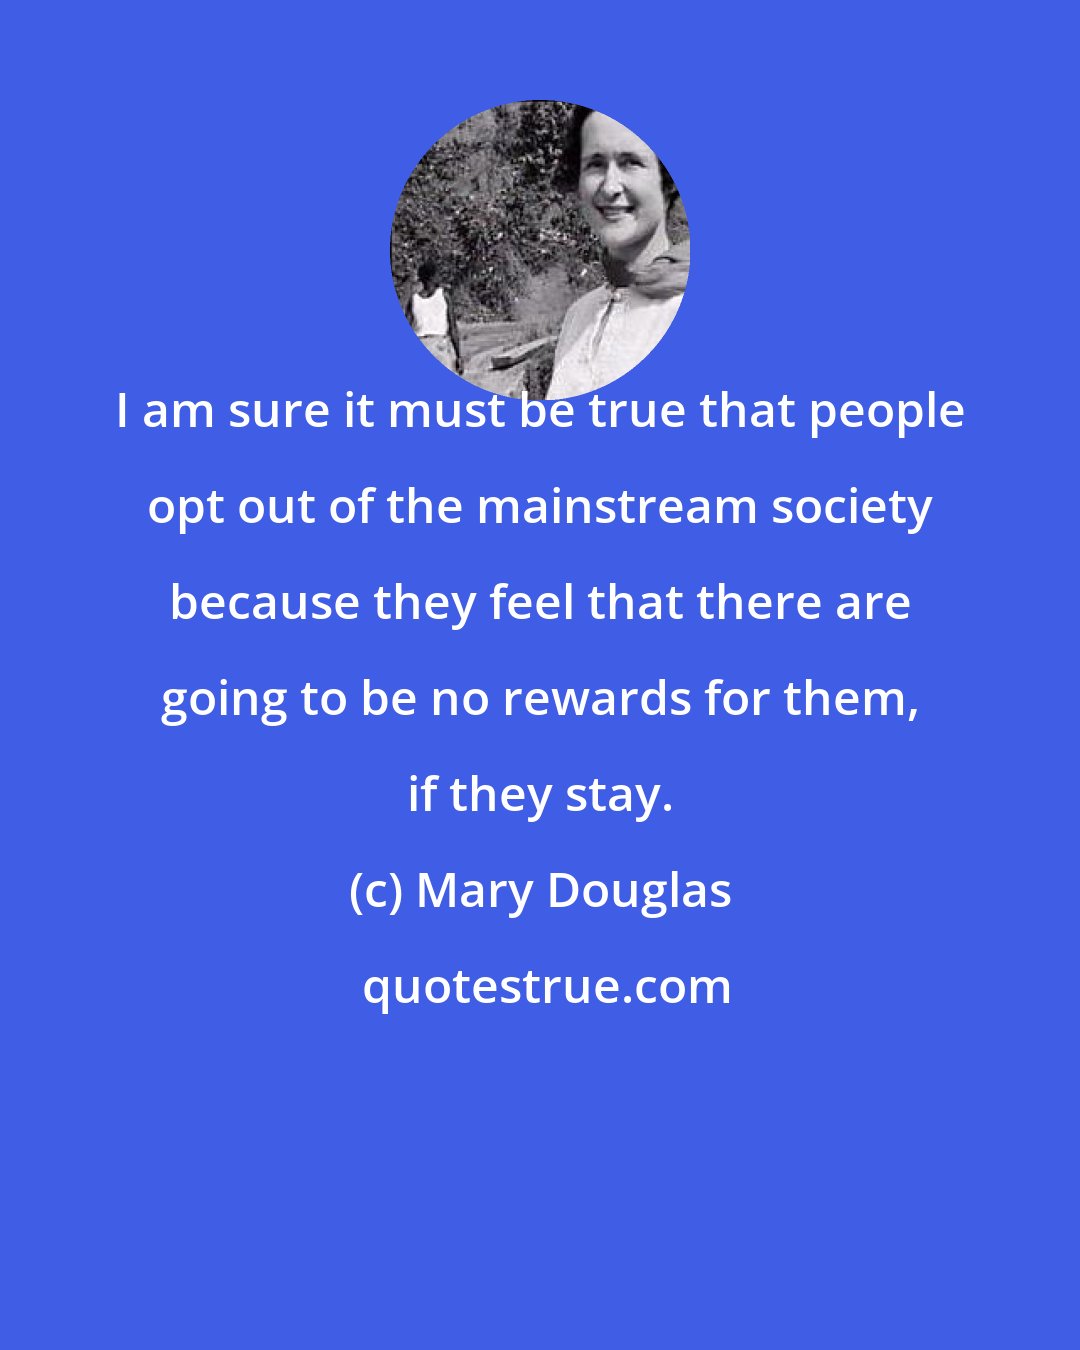 Mary Douglas: I am sure it must be true that people opt out of the mainstream society because they feel that there are going to be no rewards for them, if they stay.